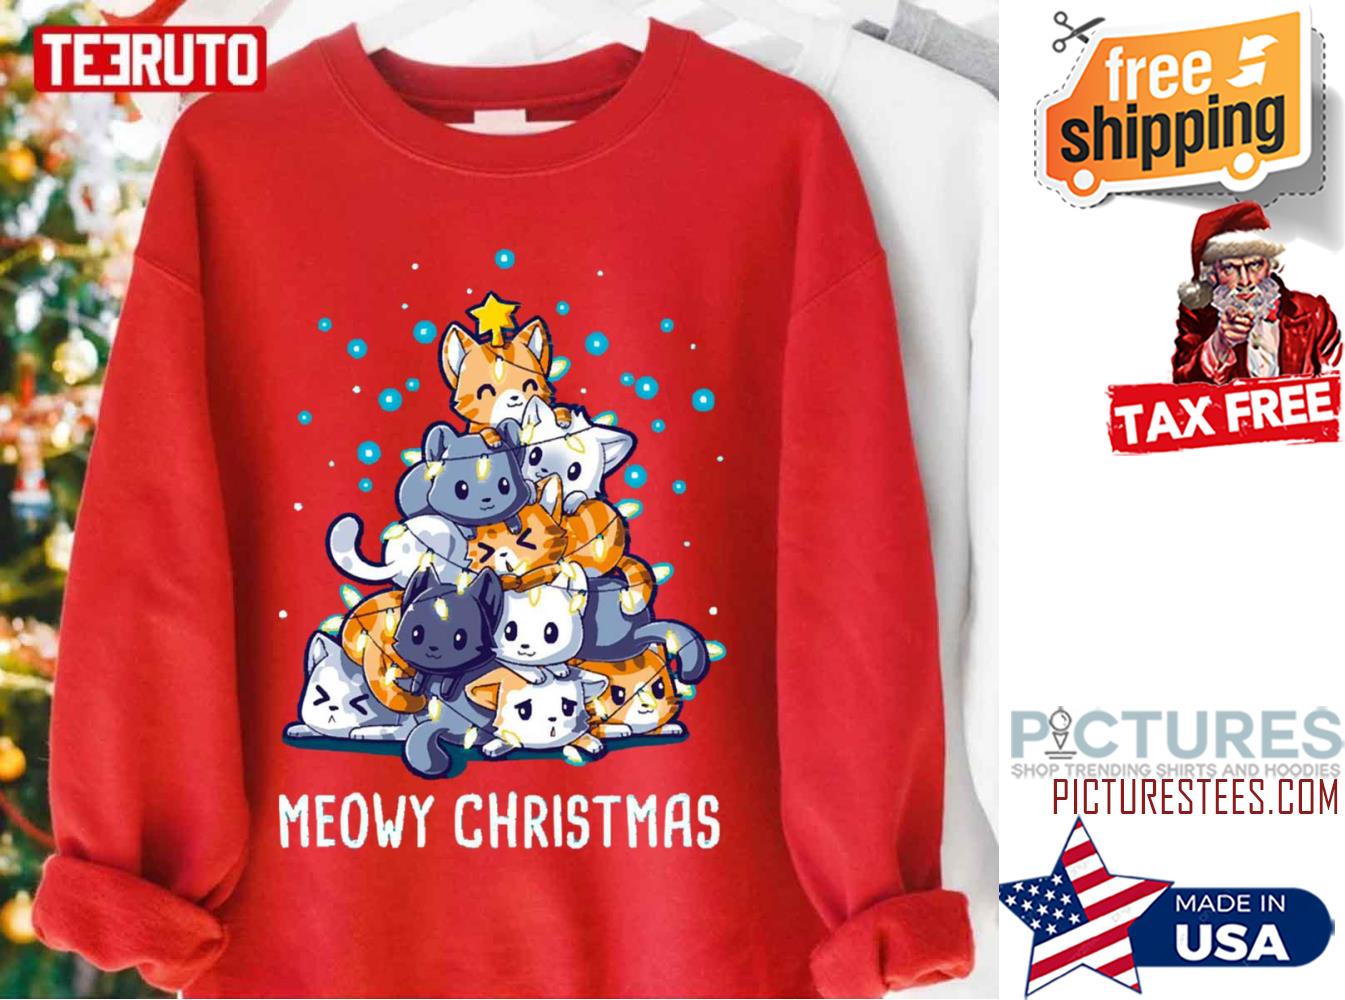 Cat Christmas Sweater Gifts Meowy Christmas Sweatshirt Unisex Mens and Womens Cute Soft FAST Shipping Trending Popular T-shirts